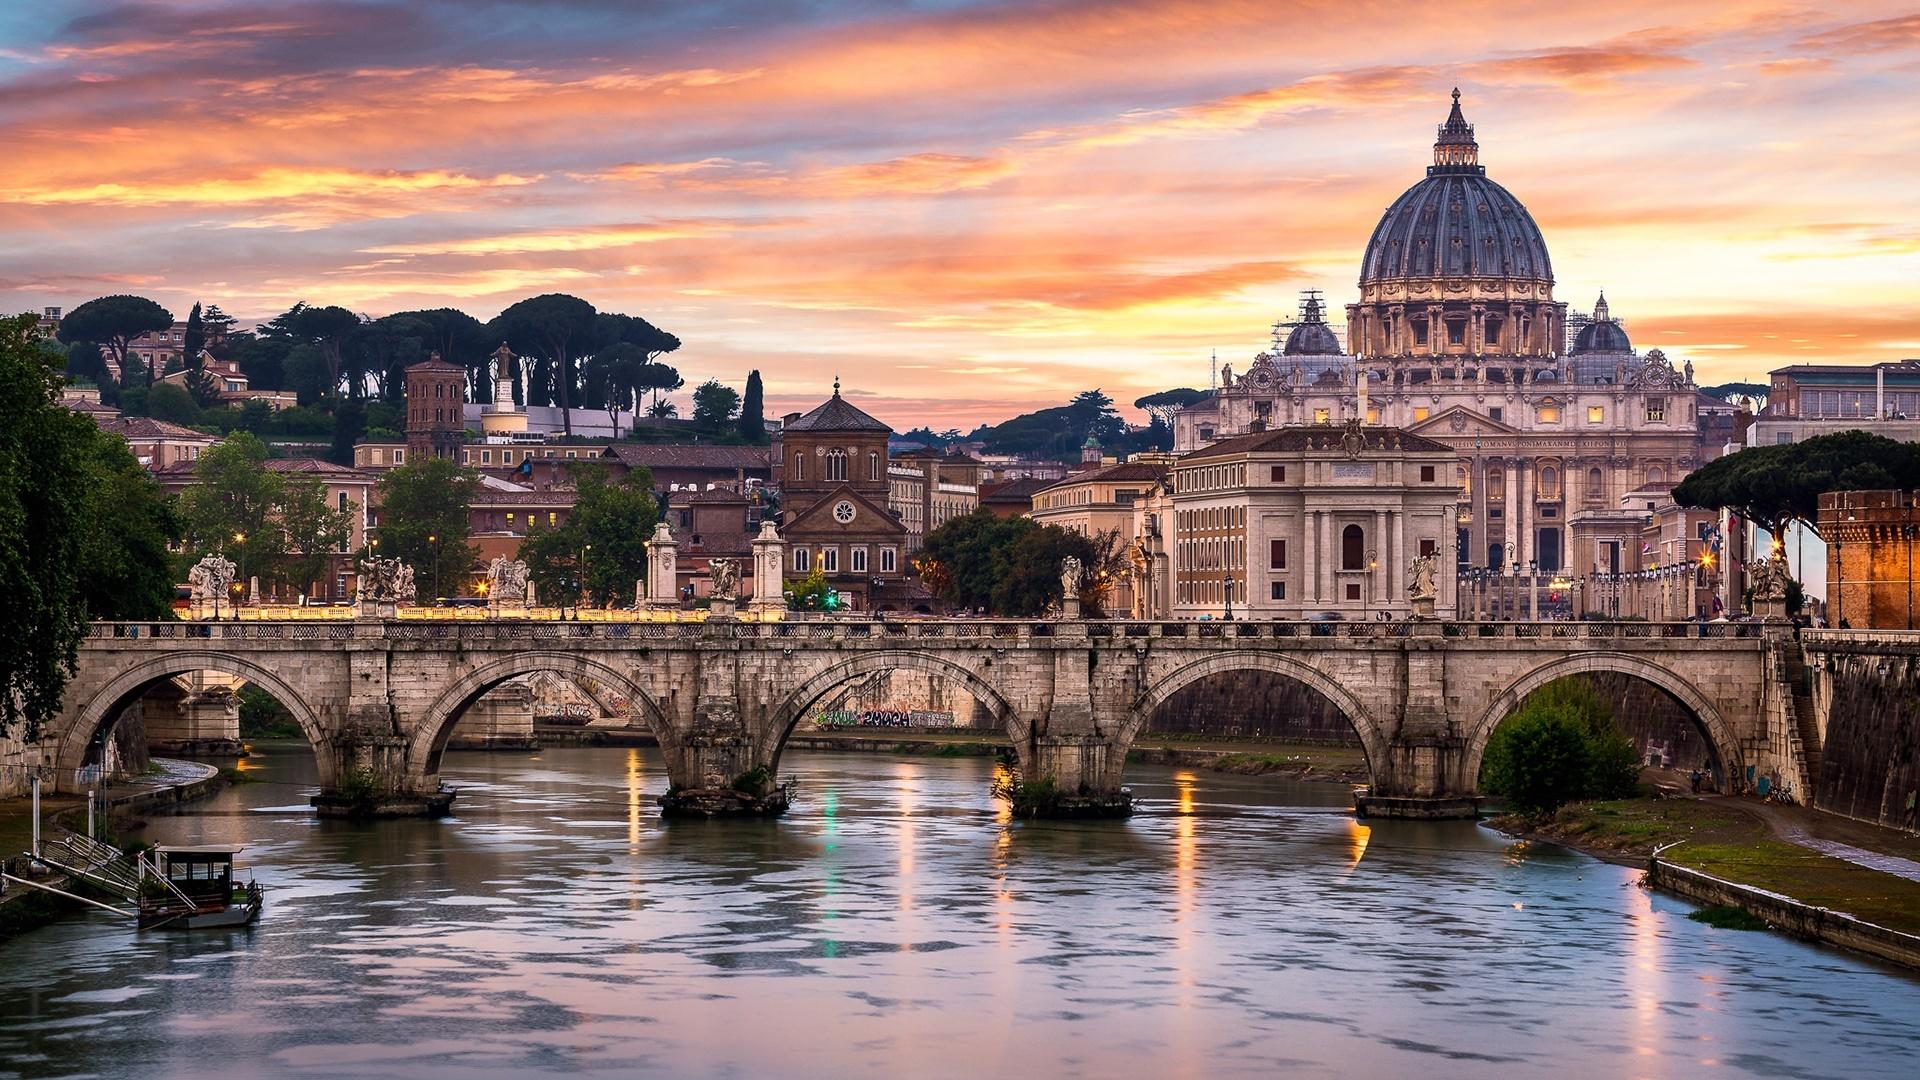 Bridge Of Angels And St Peter’s Basilica 2K Wallpapers